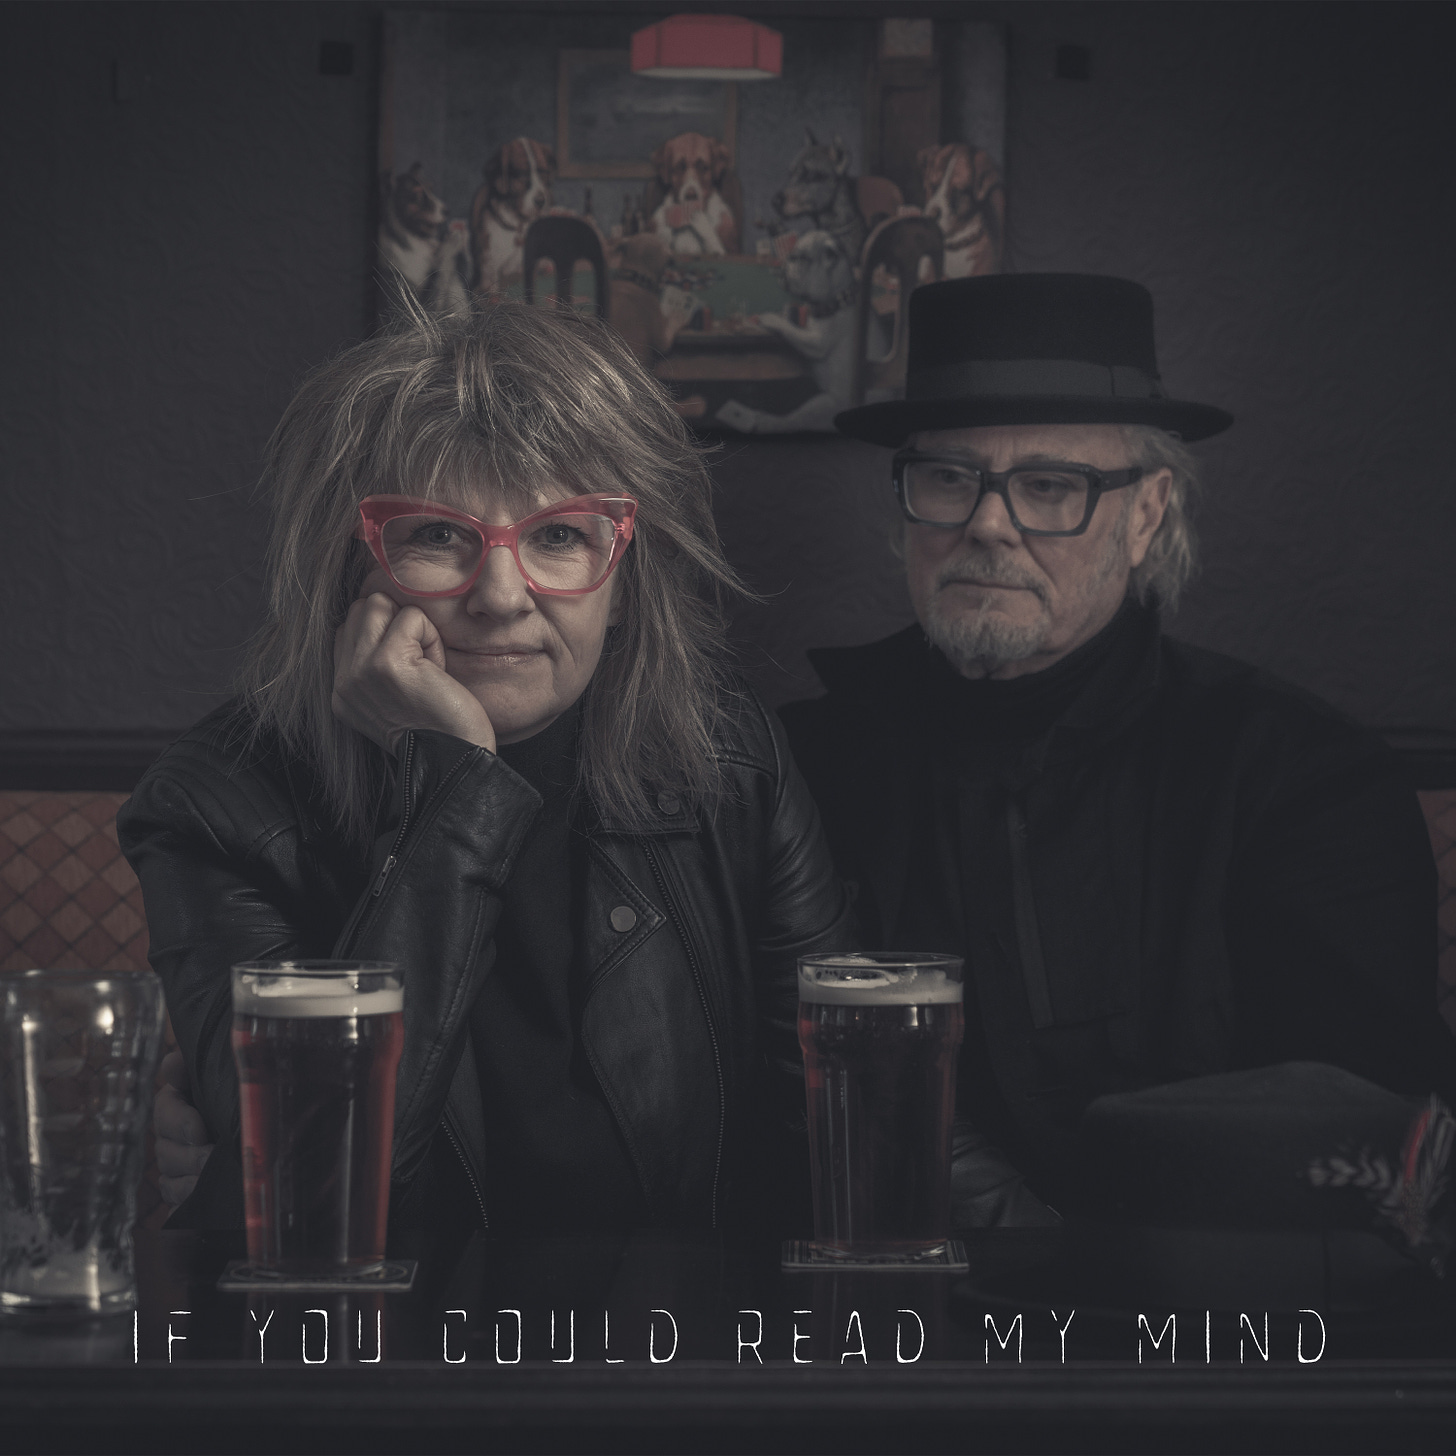 Single cover of If You Could Read My Mind written by Gordon Lightfoot, recorded by Starlite & Campbell. Image is Suzy and Starlite in a pub drinking bitter.